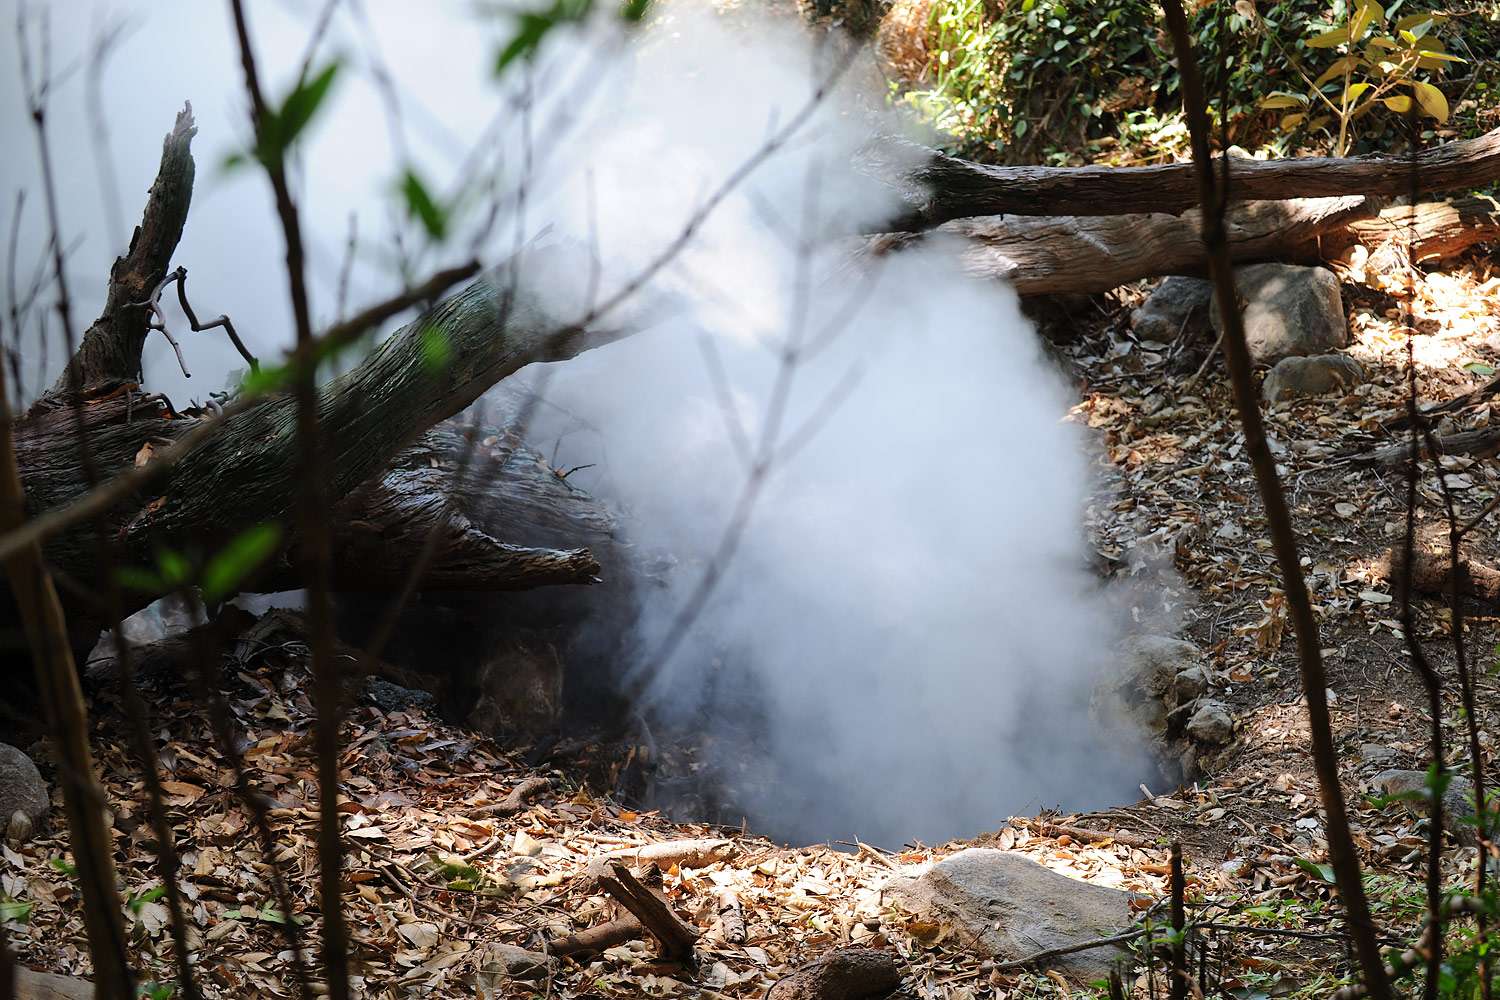 Smoke pours out of a hole in the ground, Rincón de la Vieja, Costa Rica